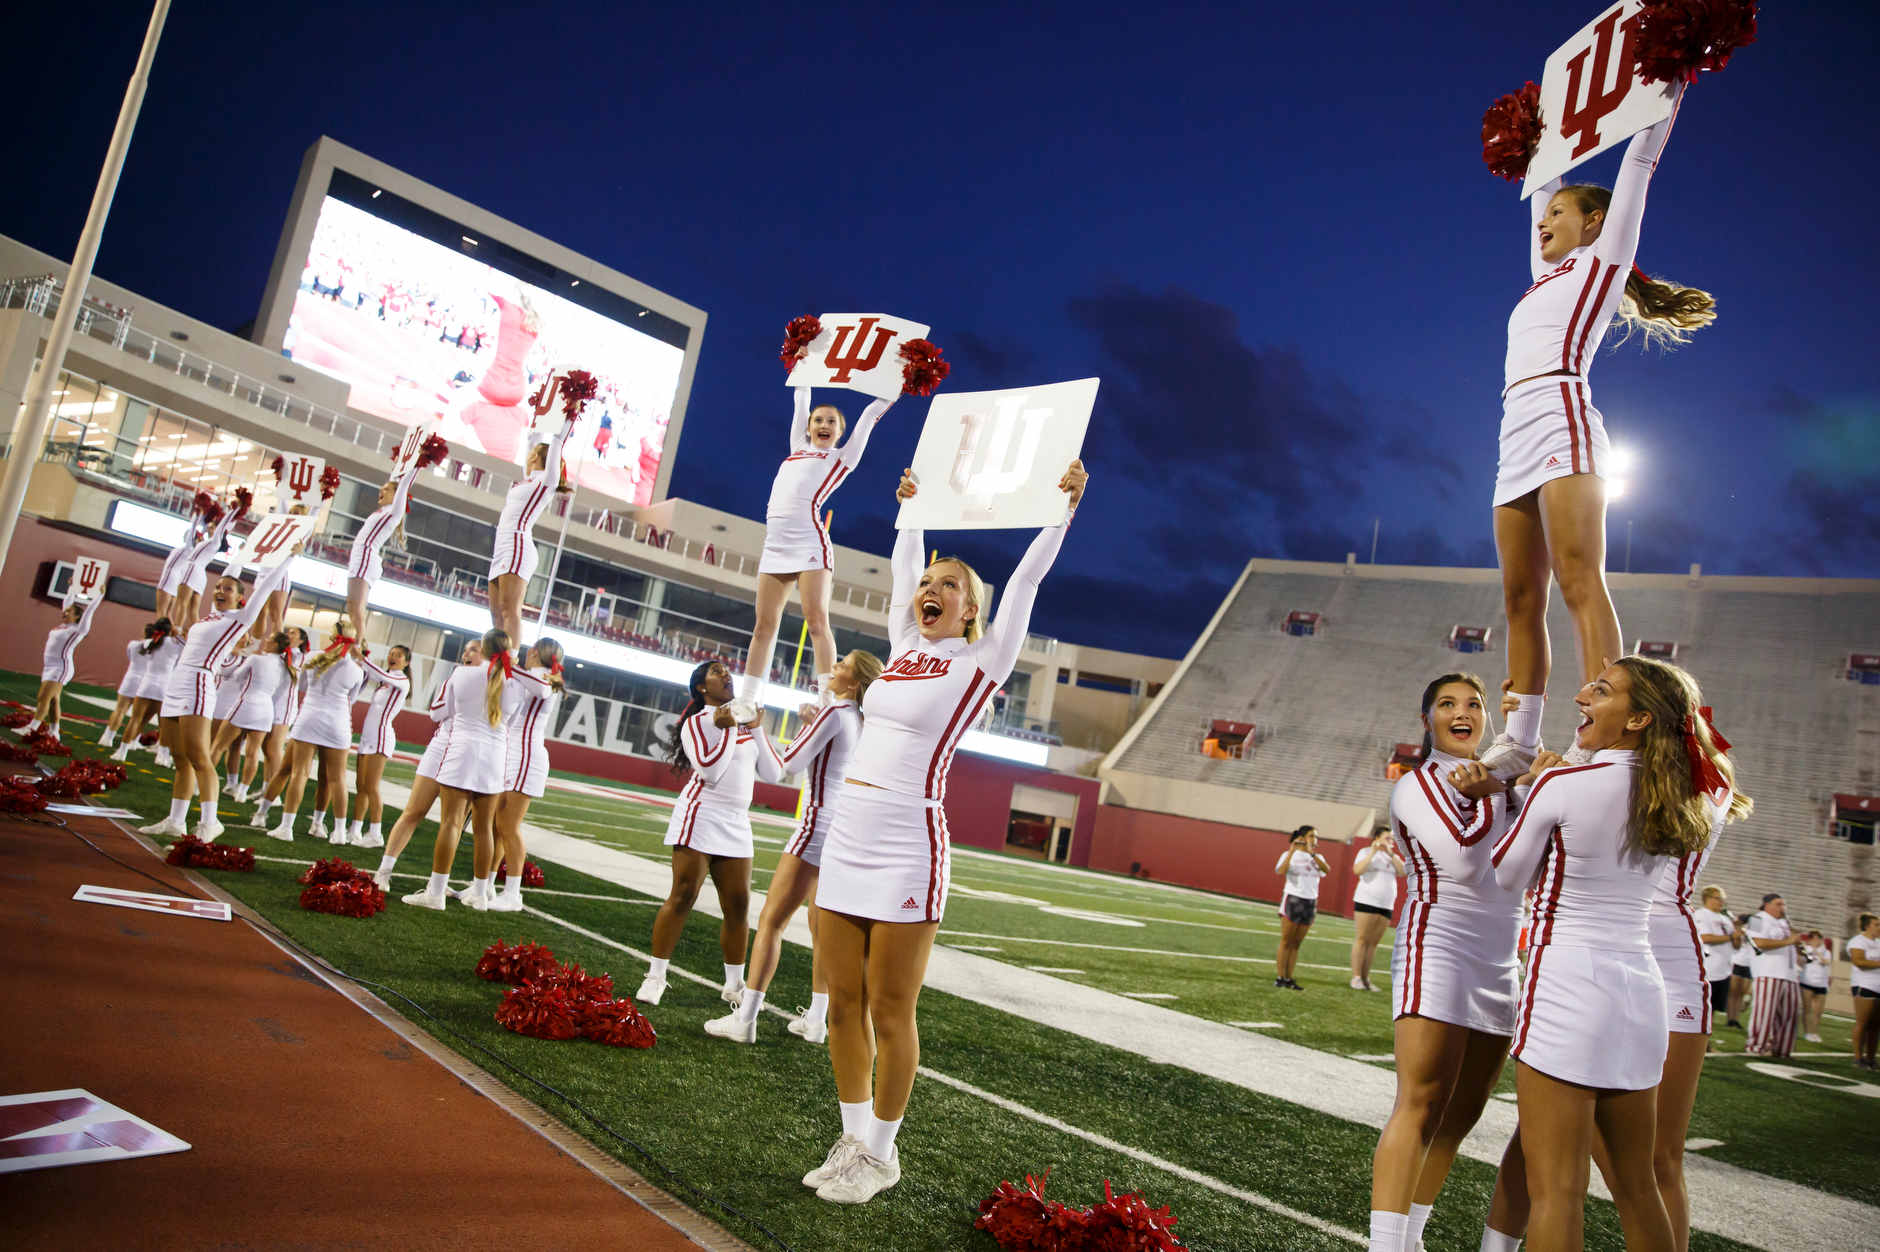 Indiana University cheerleaders teach the crowd a cheer during the Traditions and Spirit of IU at Memorial Stadium on Friday, Aug. 23, 2019. (James Brosher/Indiana University)